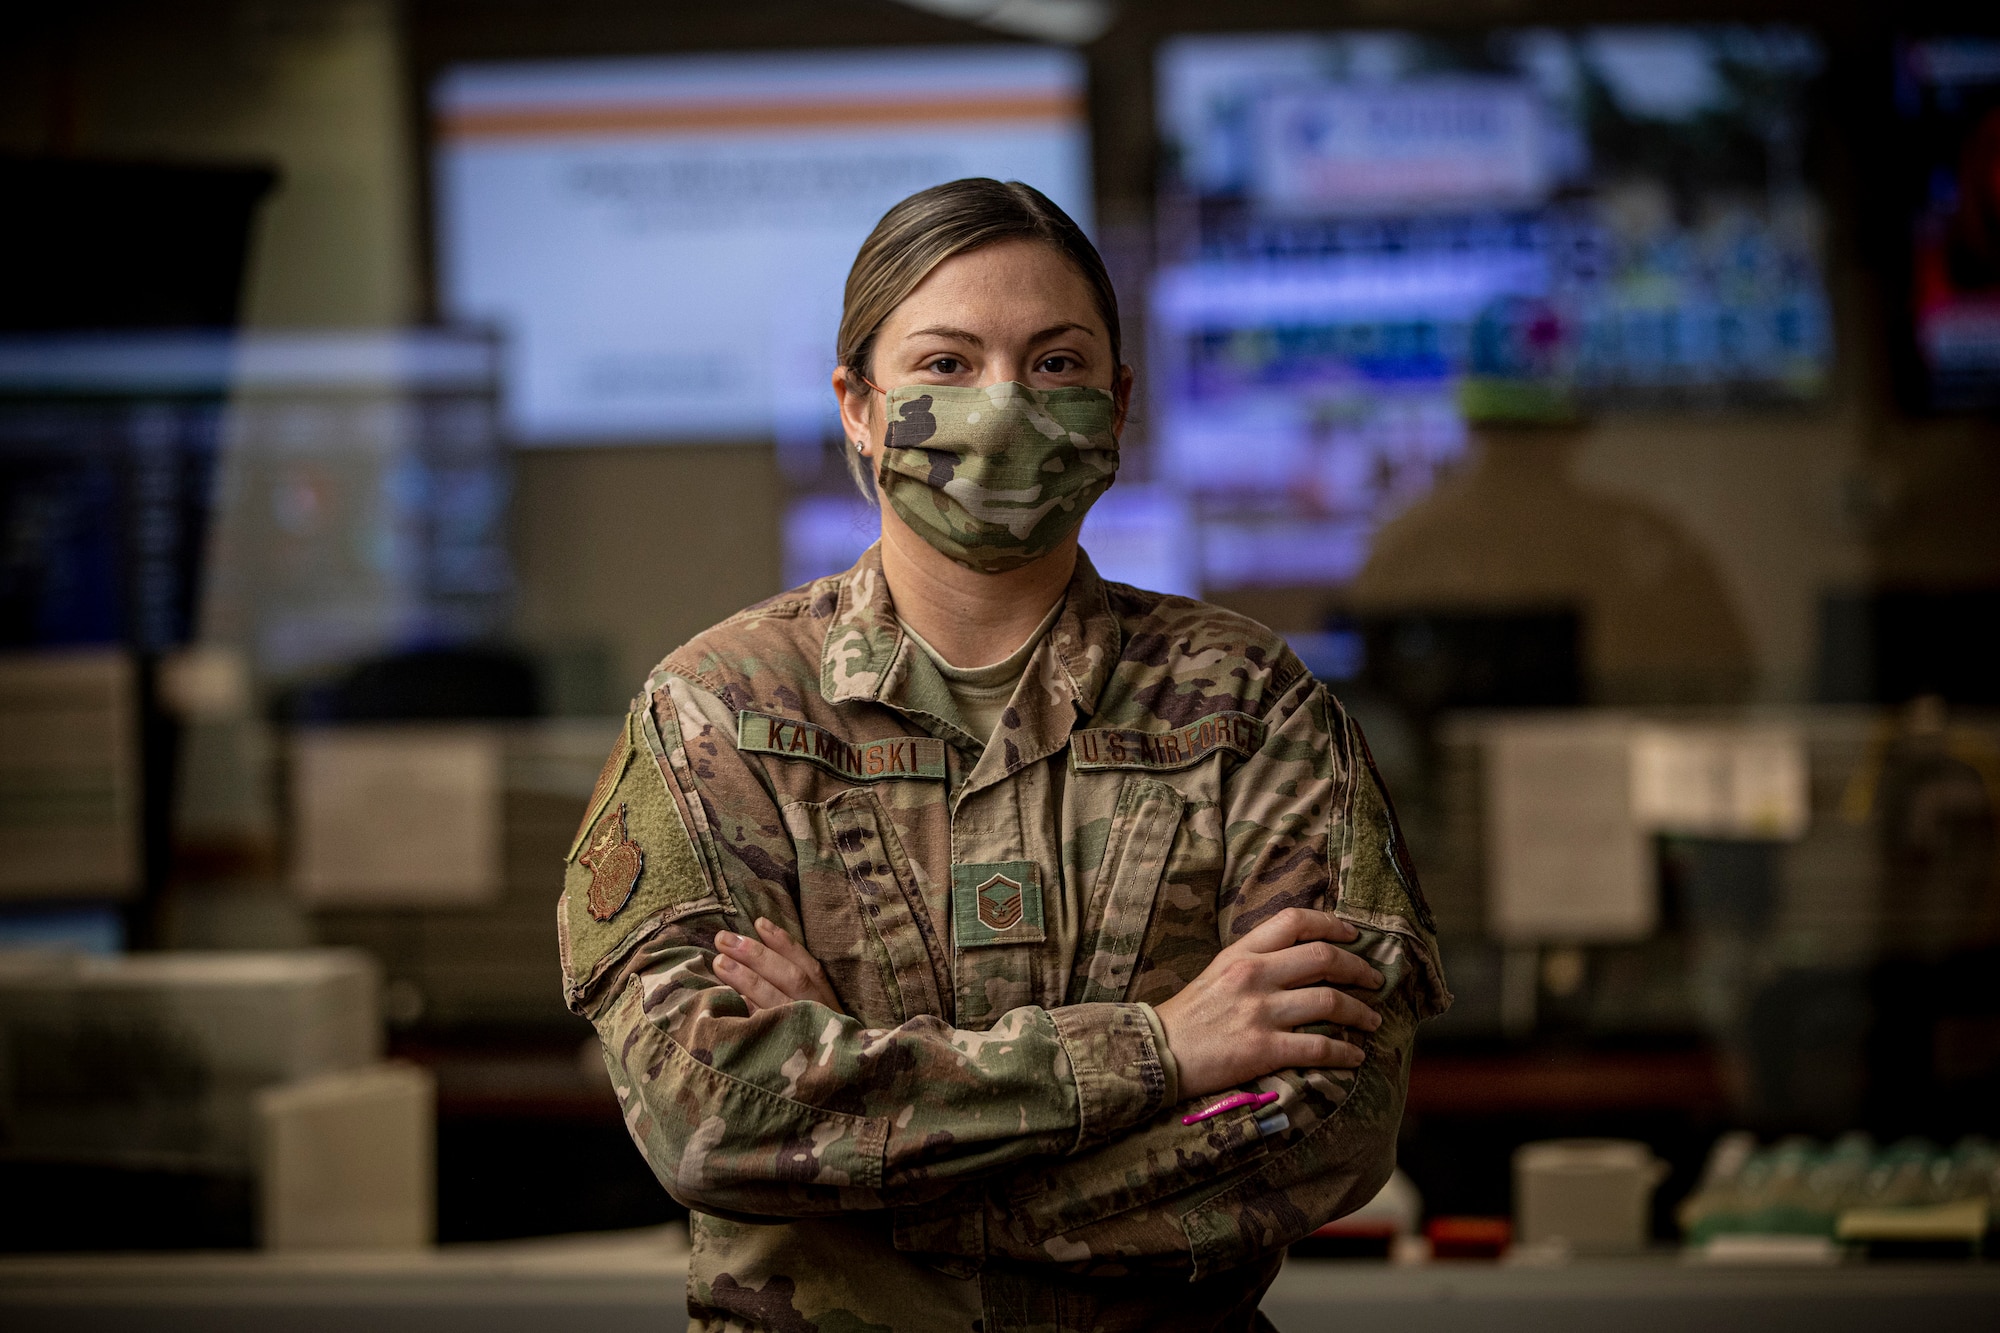 U.S. Air Force Master Sgt. Kimberly Kaminski, with the 108th Wing, in the New Jersey National Guard’s Joint Operations Center in the Homeland Security Center of Excellence, Lawrenceville, N.J., April 22, 2020. New Jersey Soldiers and Airmen and active duty military members and civilians from U.S. Northern Command are working together in the center to support the state’s response efforts to COVID-19.